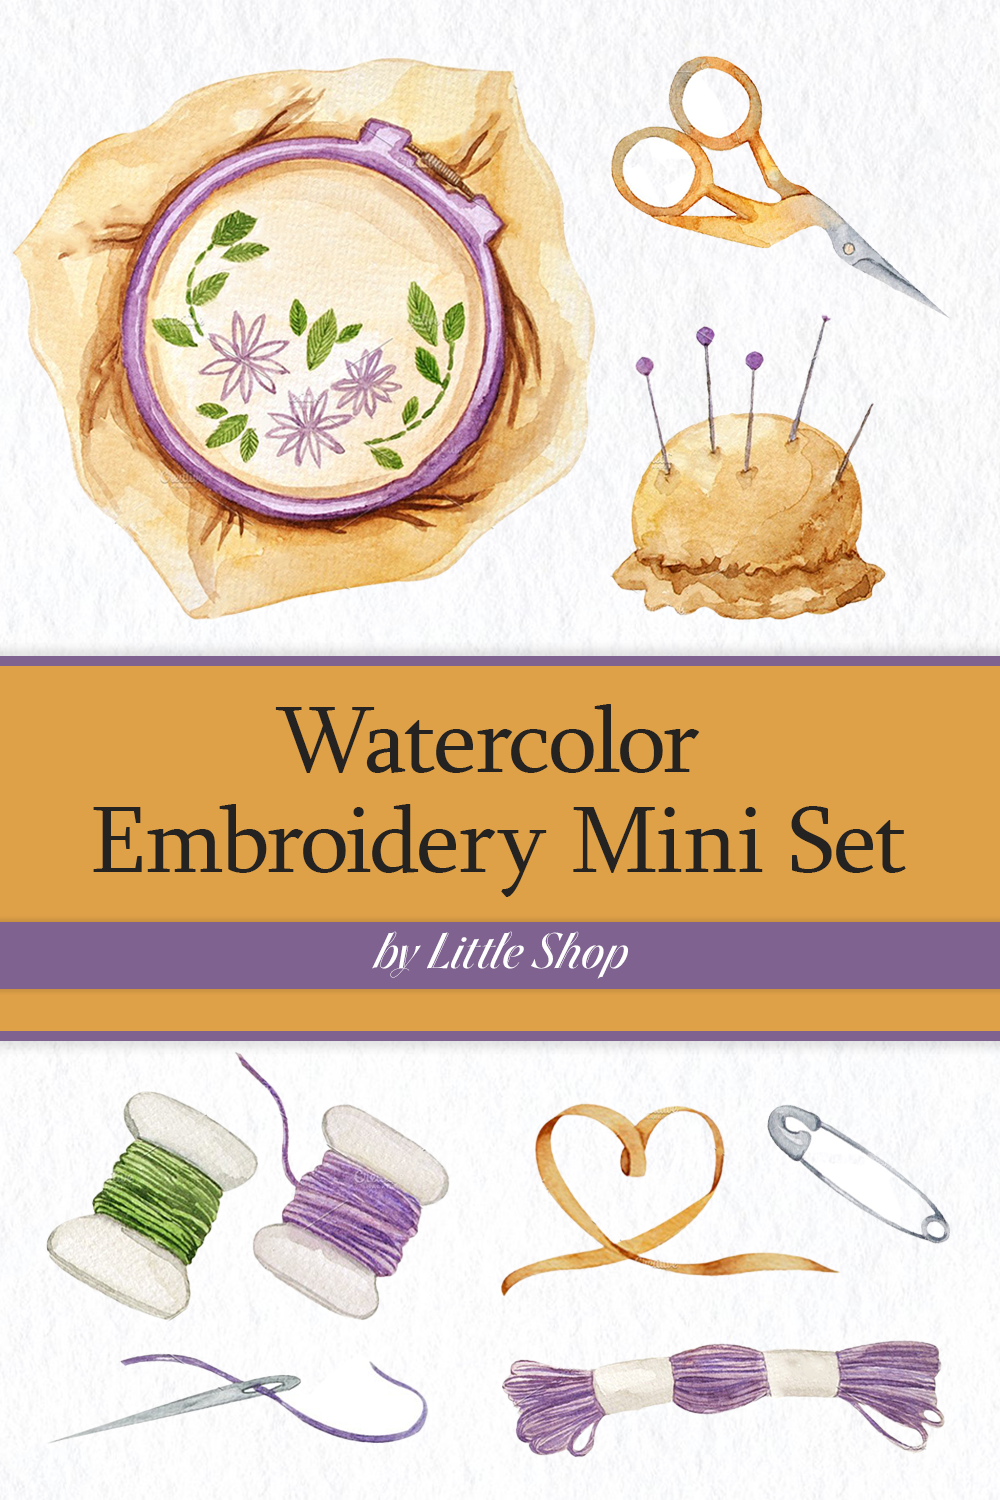 Watercolor embroidery mini set of pinterest.